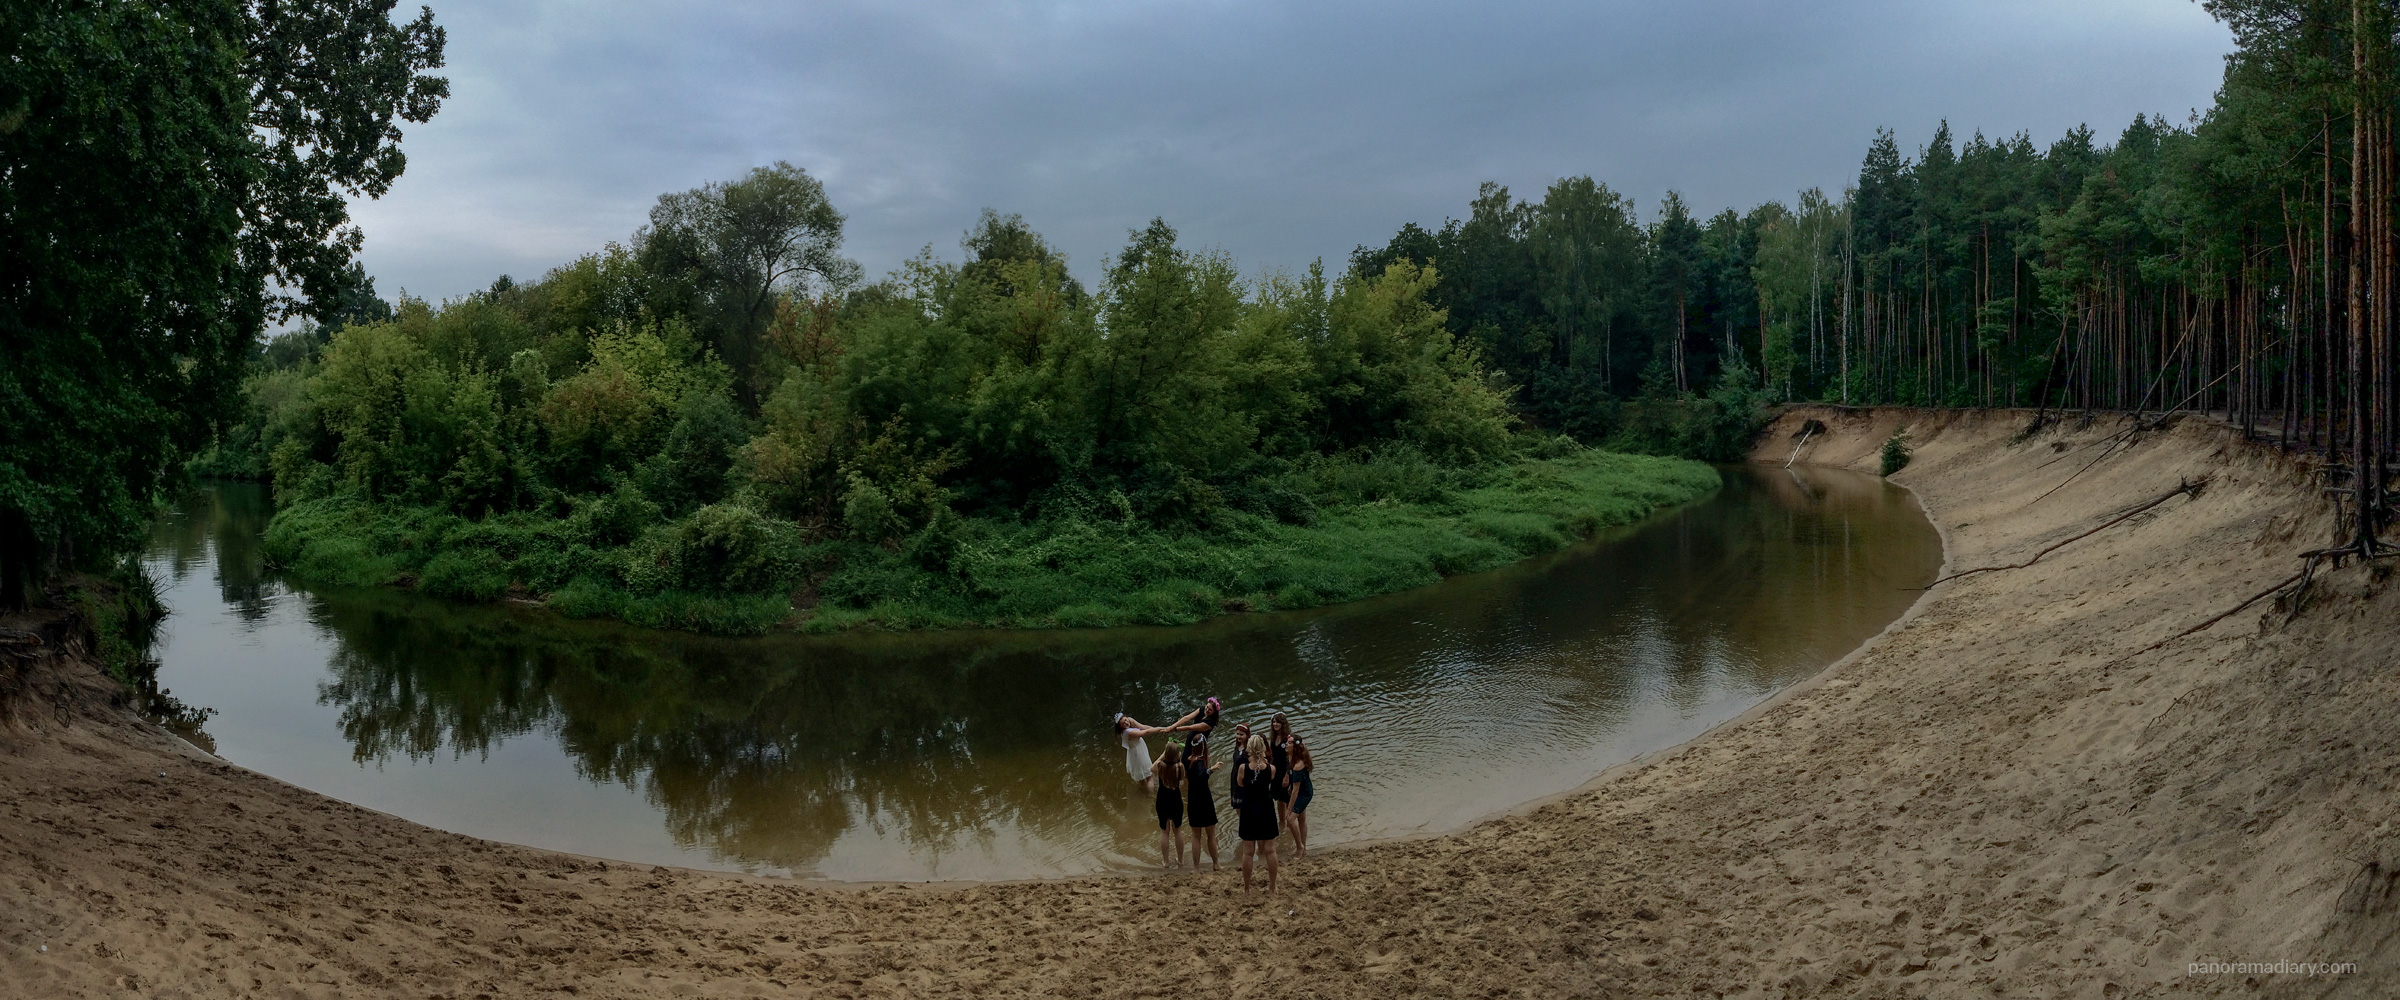 Hen party in the river | PANORAMA DIARY